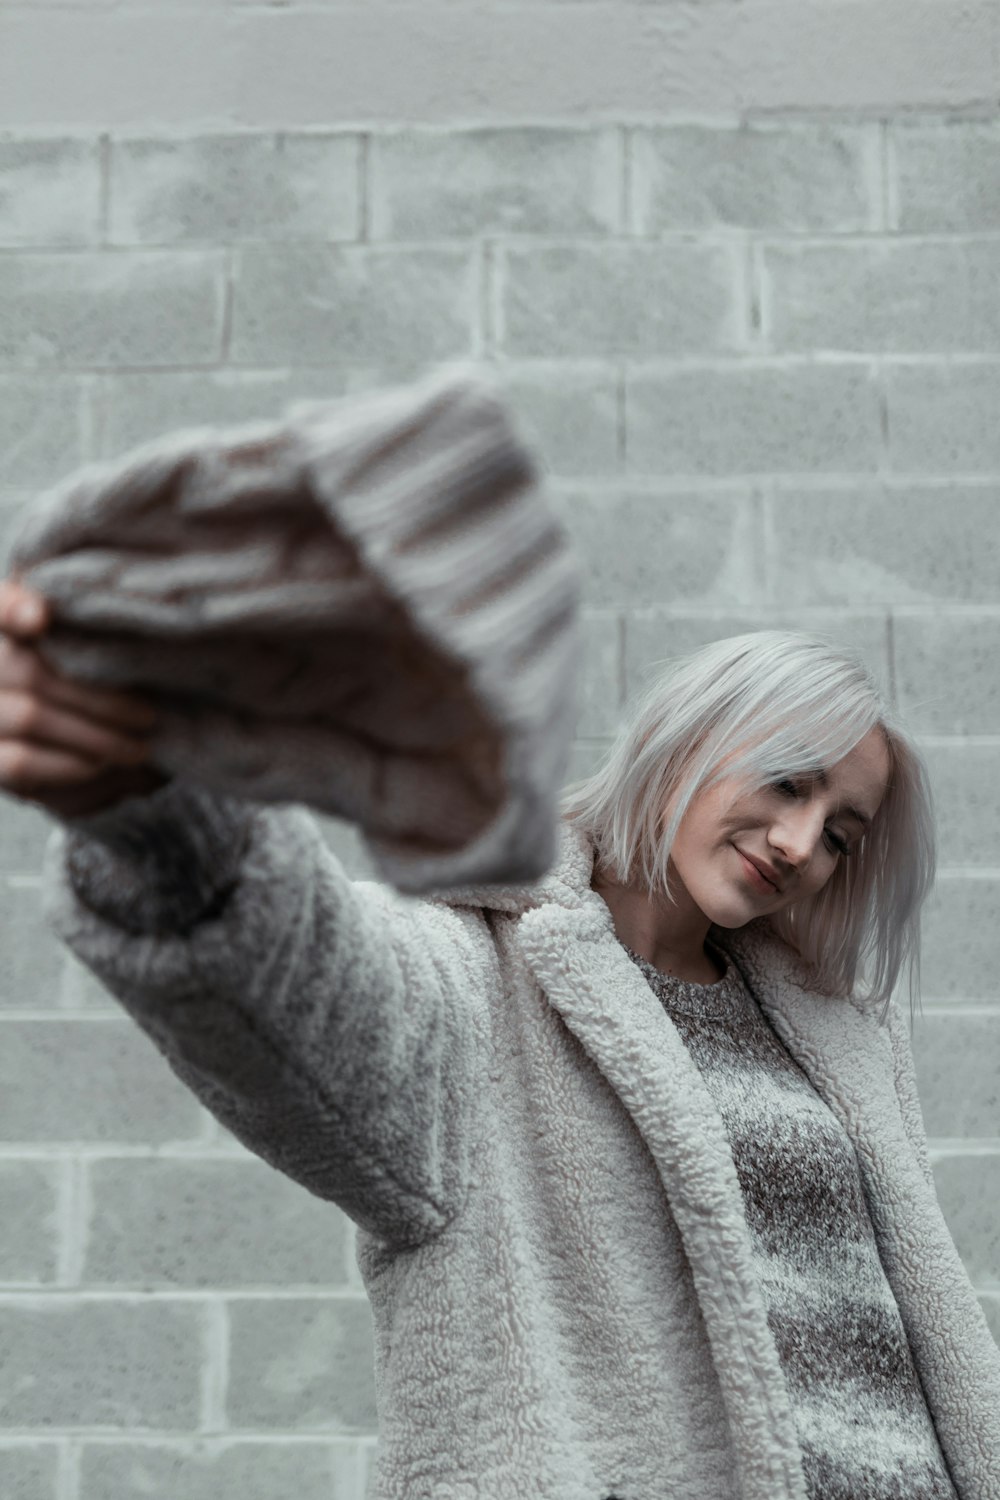 woman in gray sweater covering face with hands